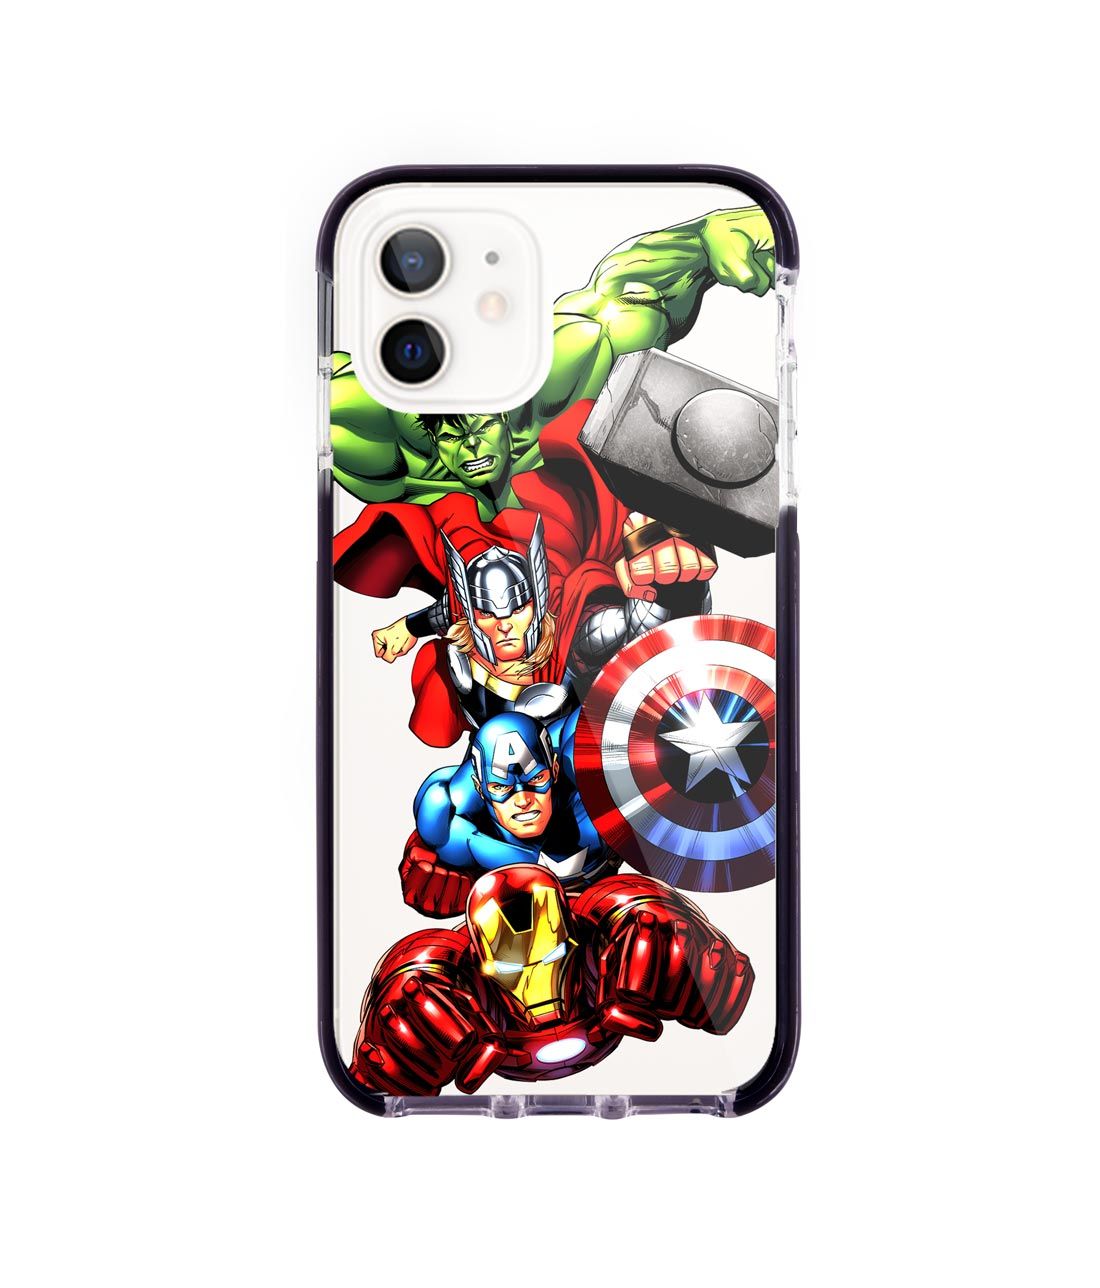 Avengers Fury - Extreme Case for iPhone 12